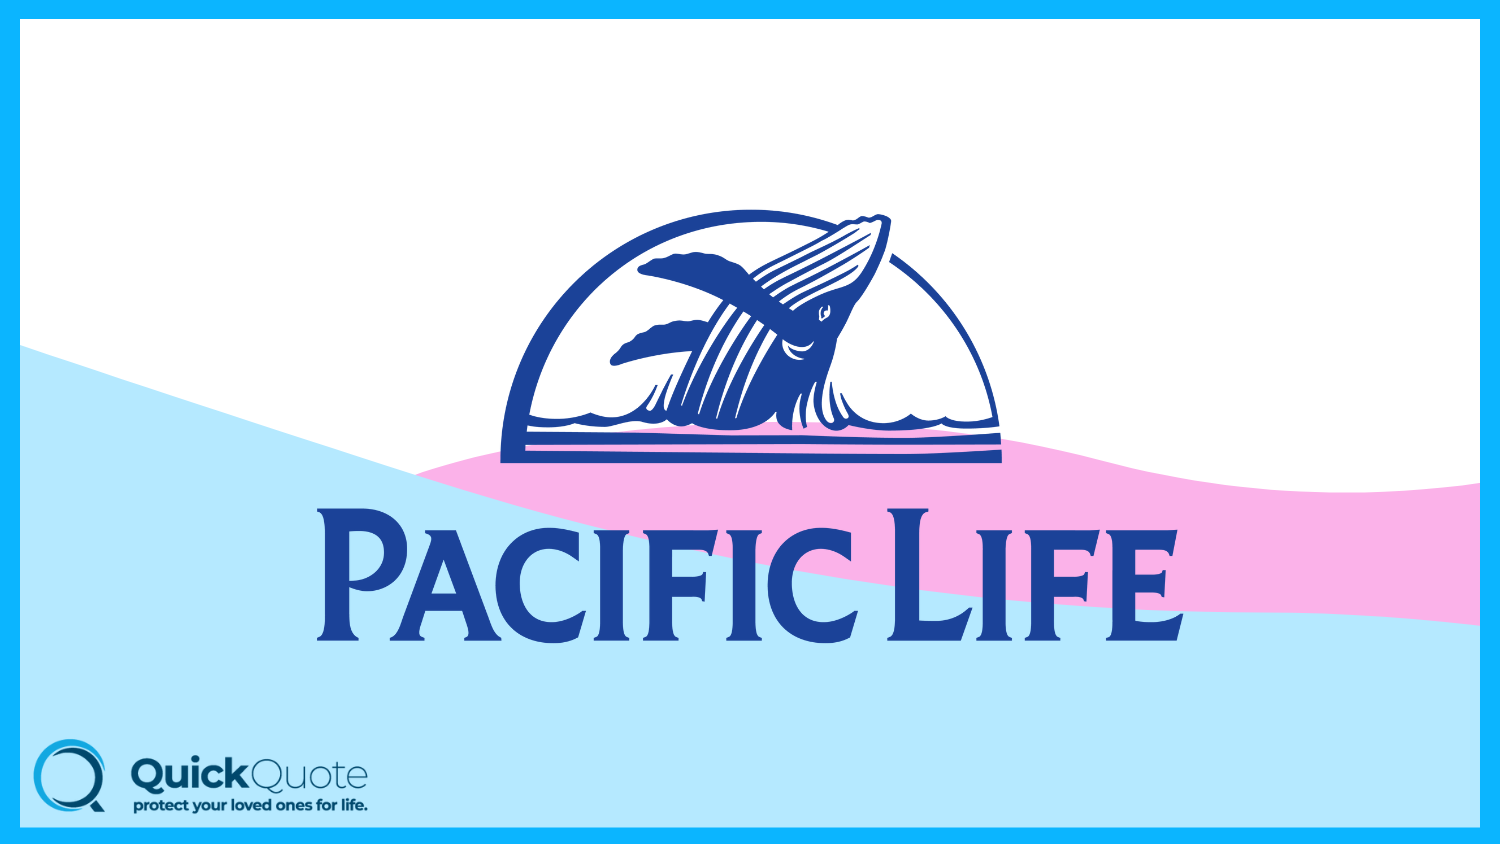 Best Life Insurance for Children: Pacific Life